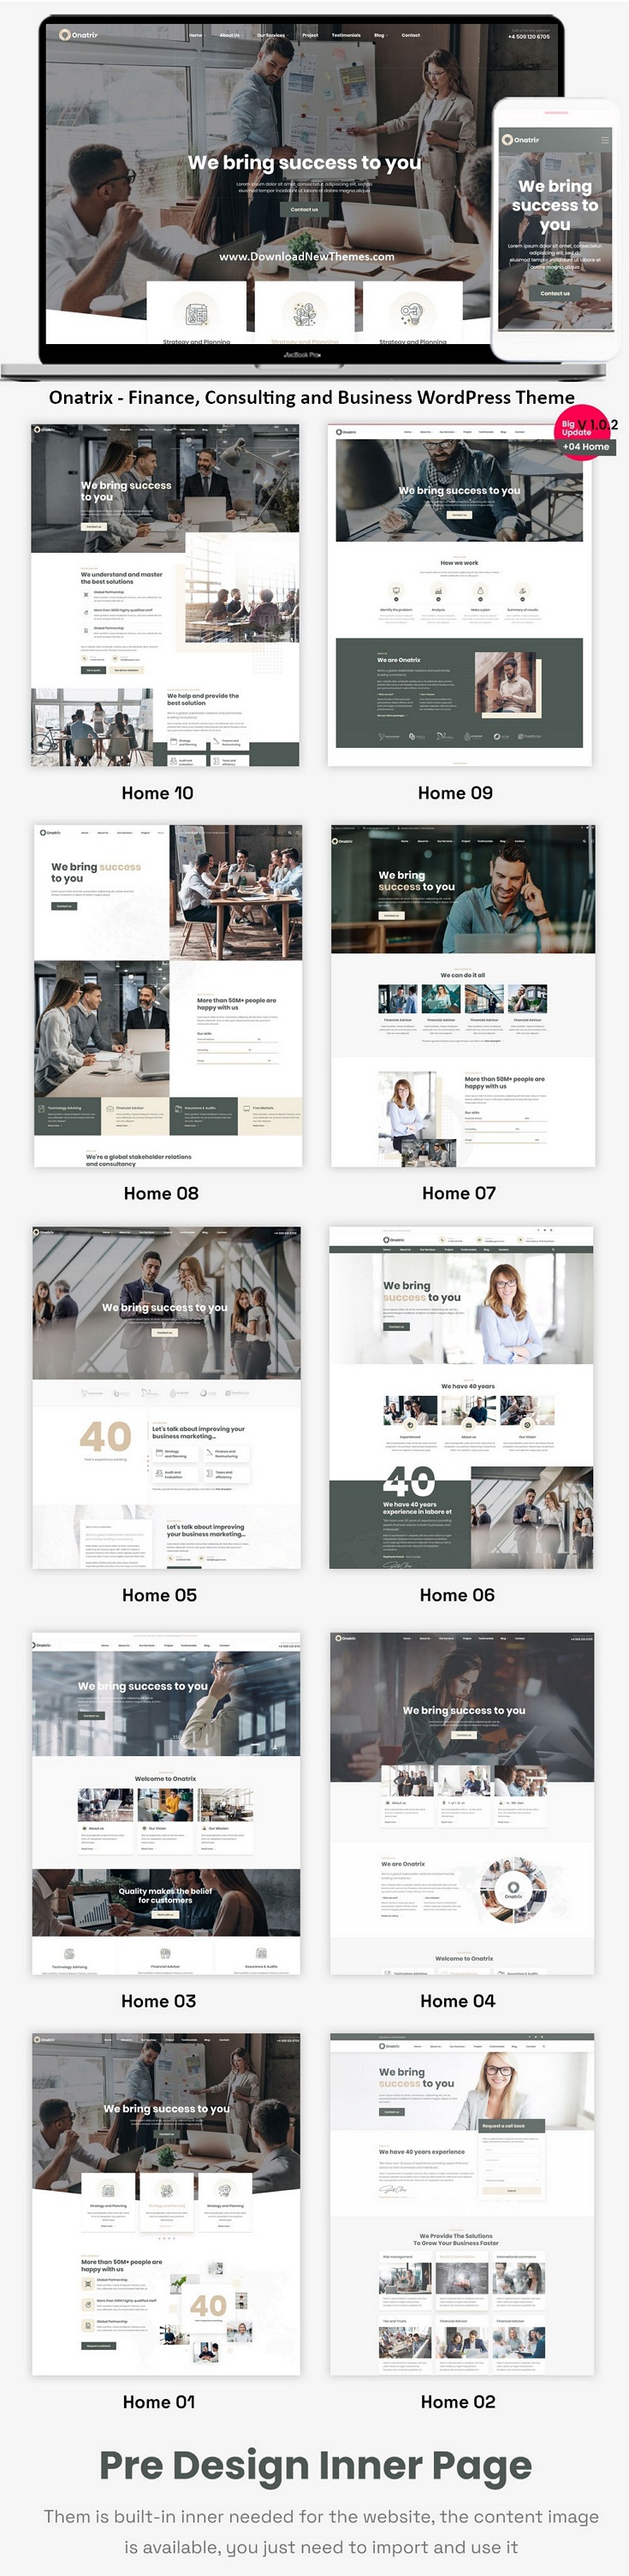 Onatrix - Finance, Consulting and Business WordPress Theme Review